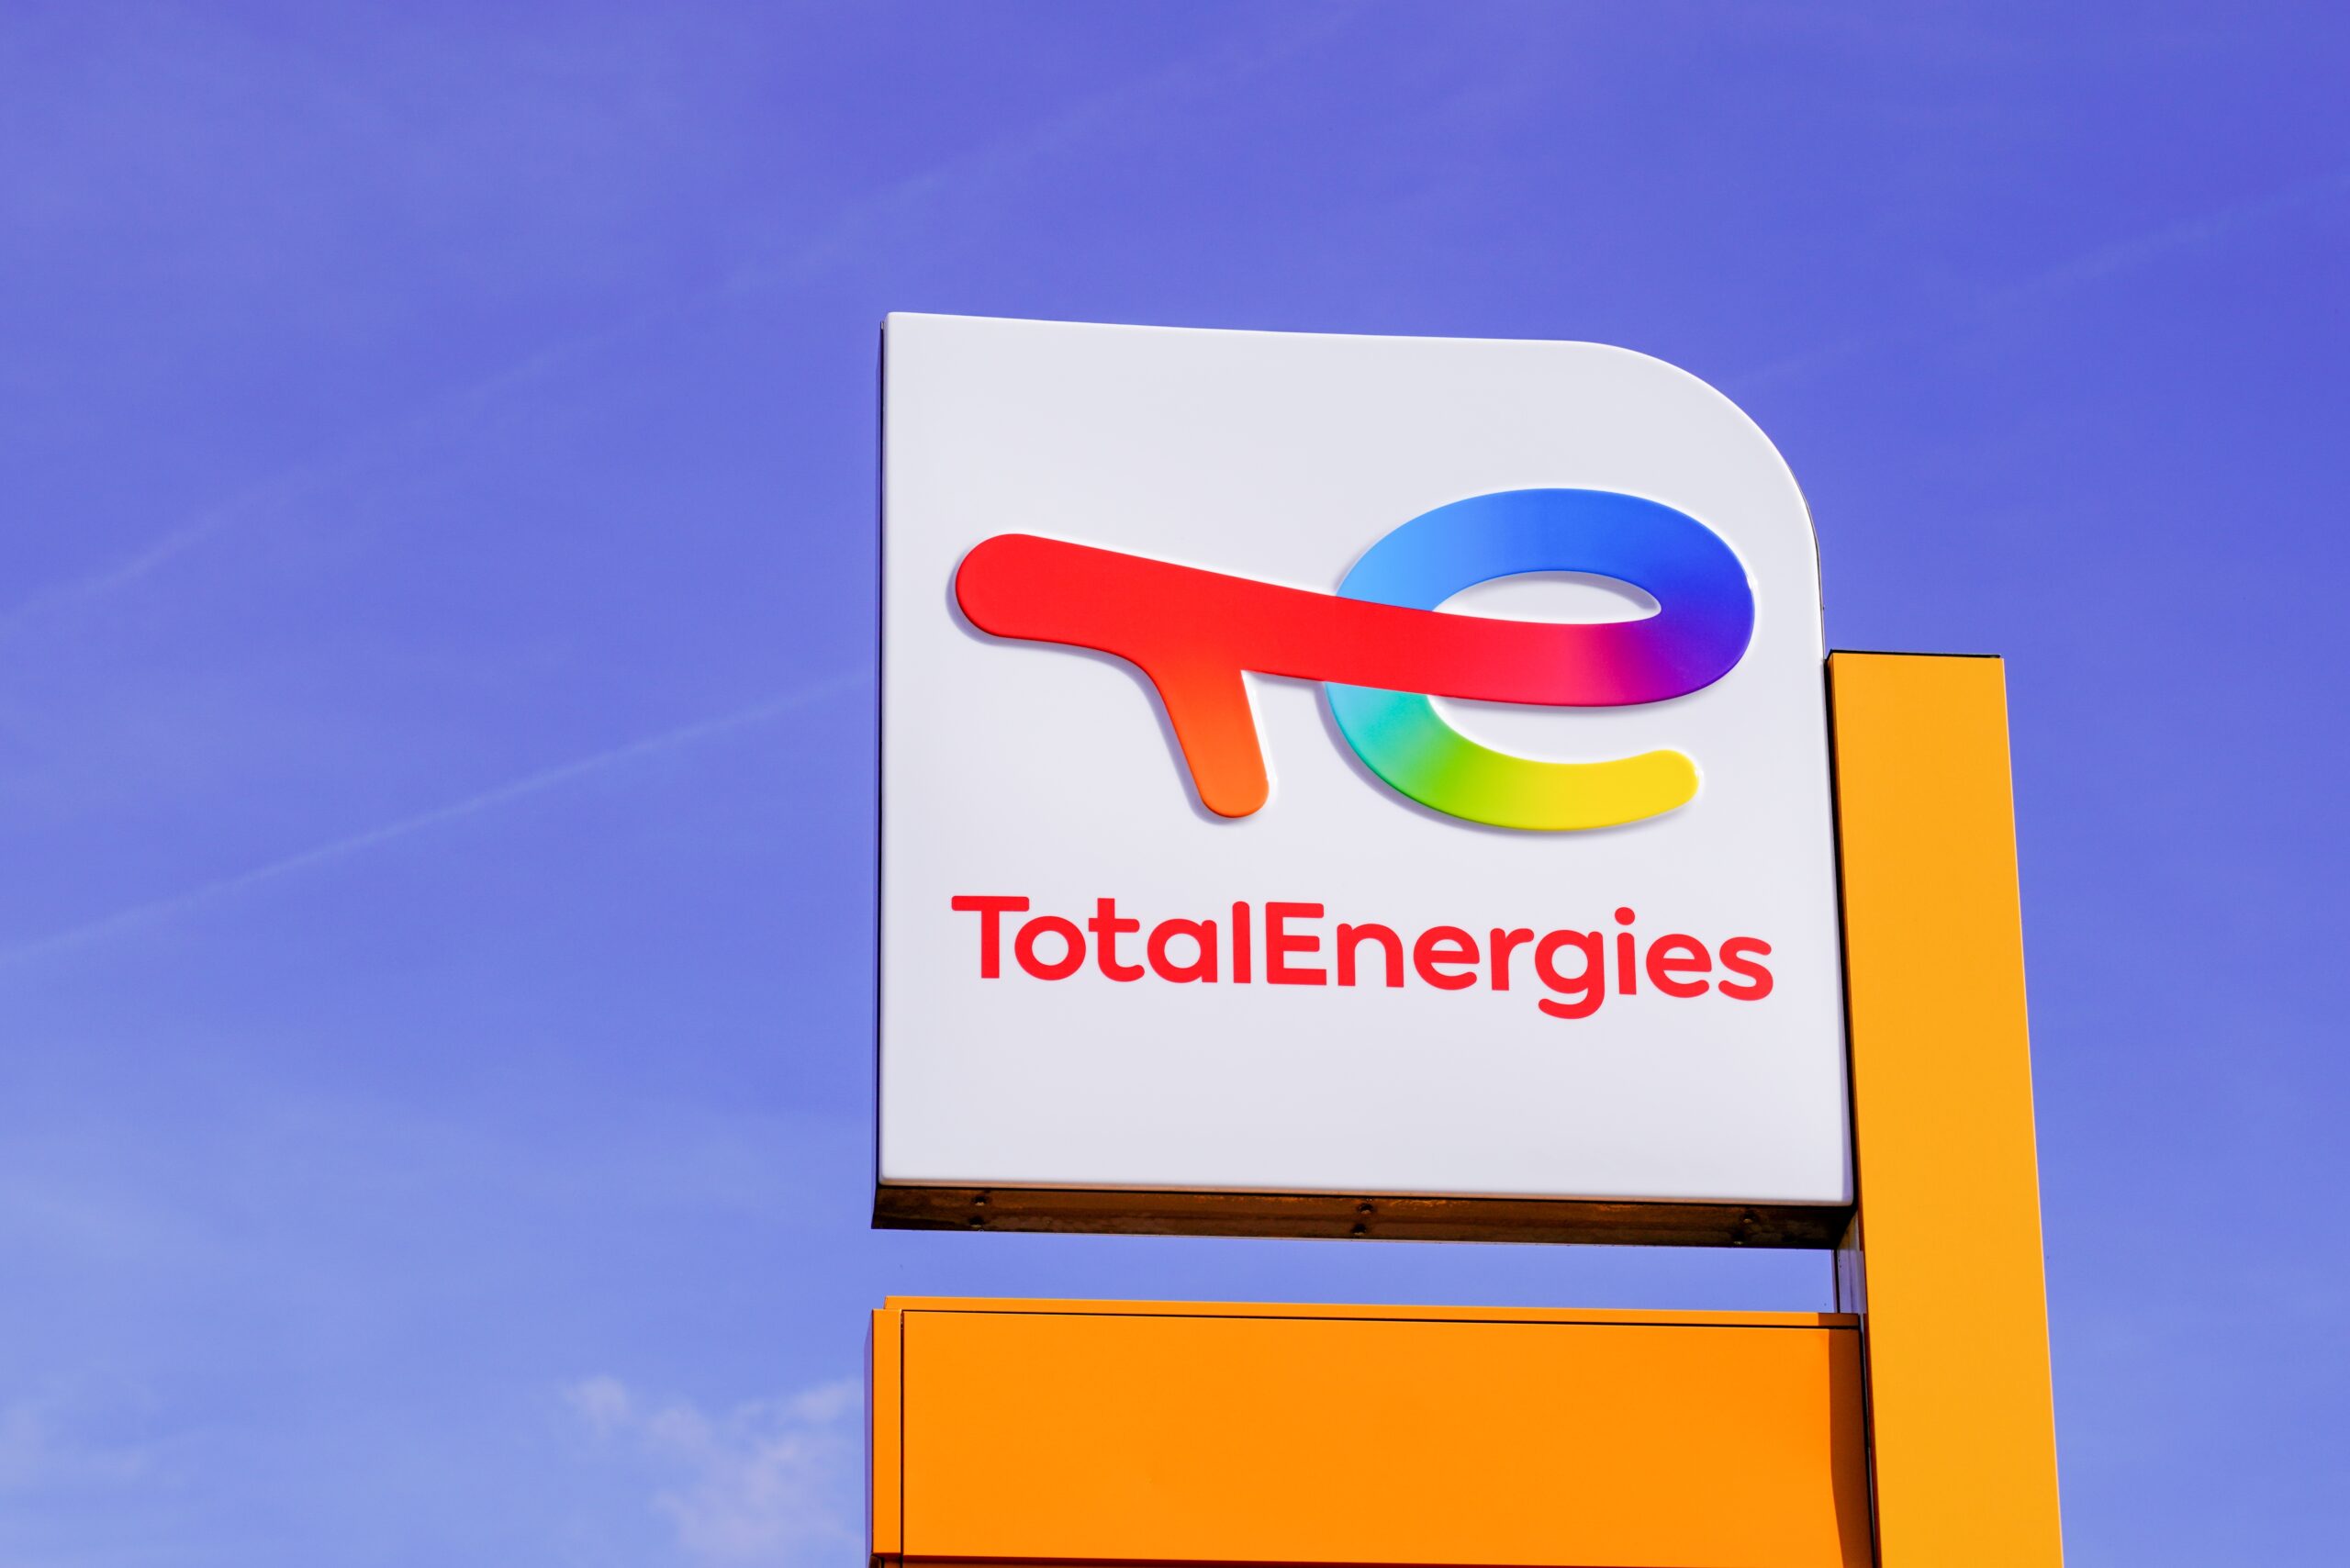 TotalEnergies sued for alleged greenwashing